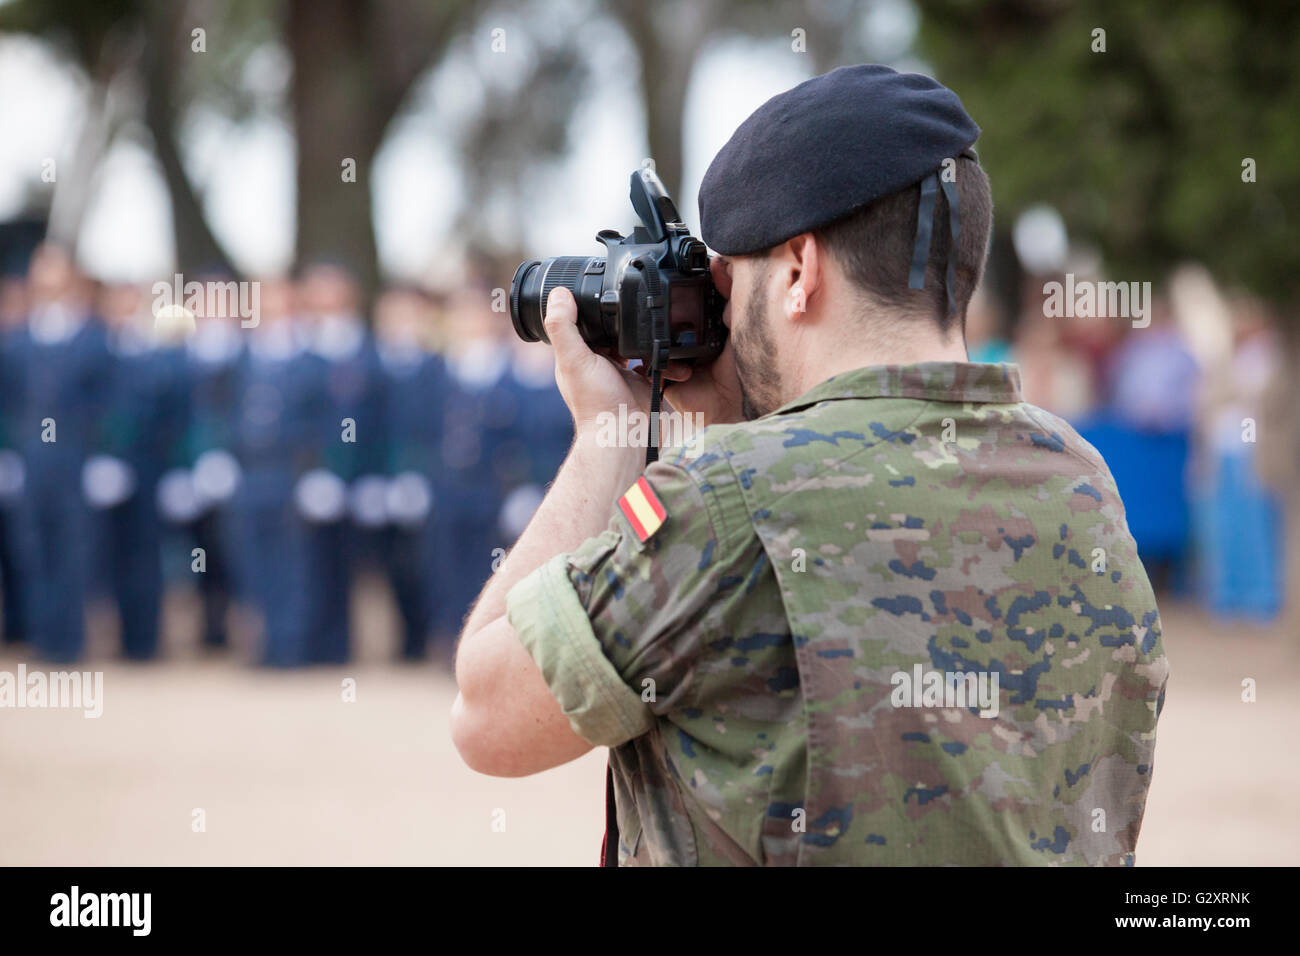 Badajoz, Spain - May 25, 2016: spanish troops during the Armed forces day. Journalist soldier Stock Photo